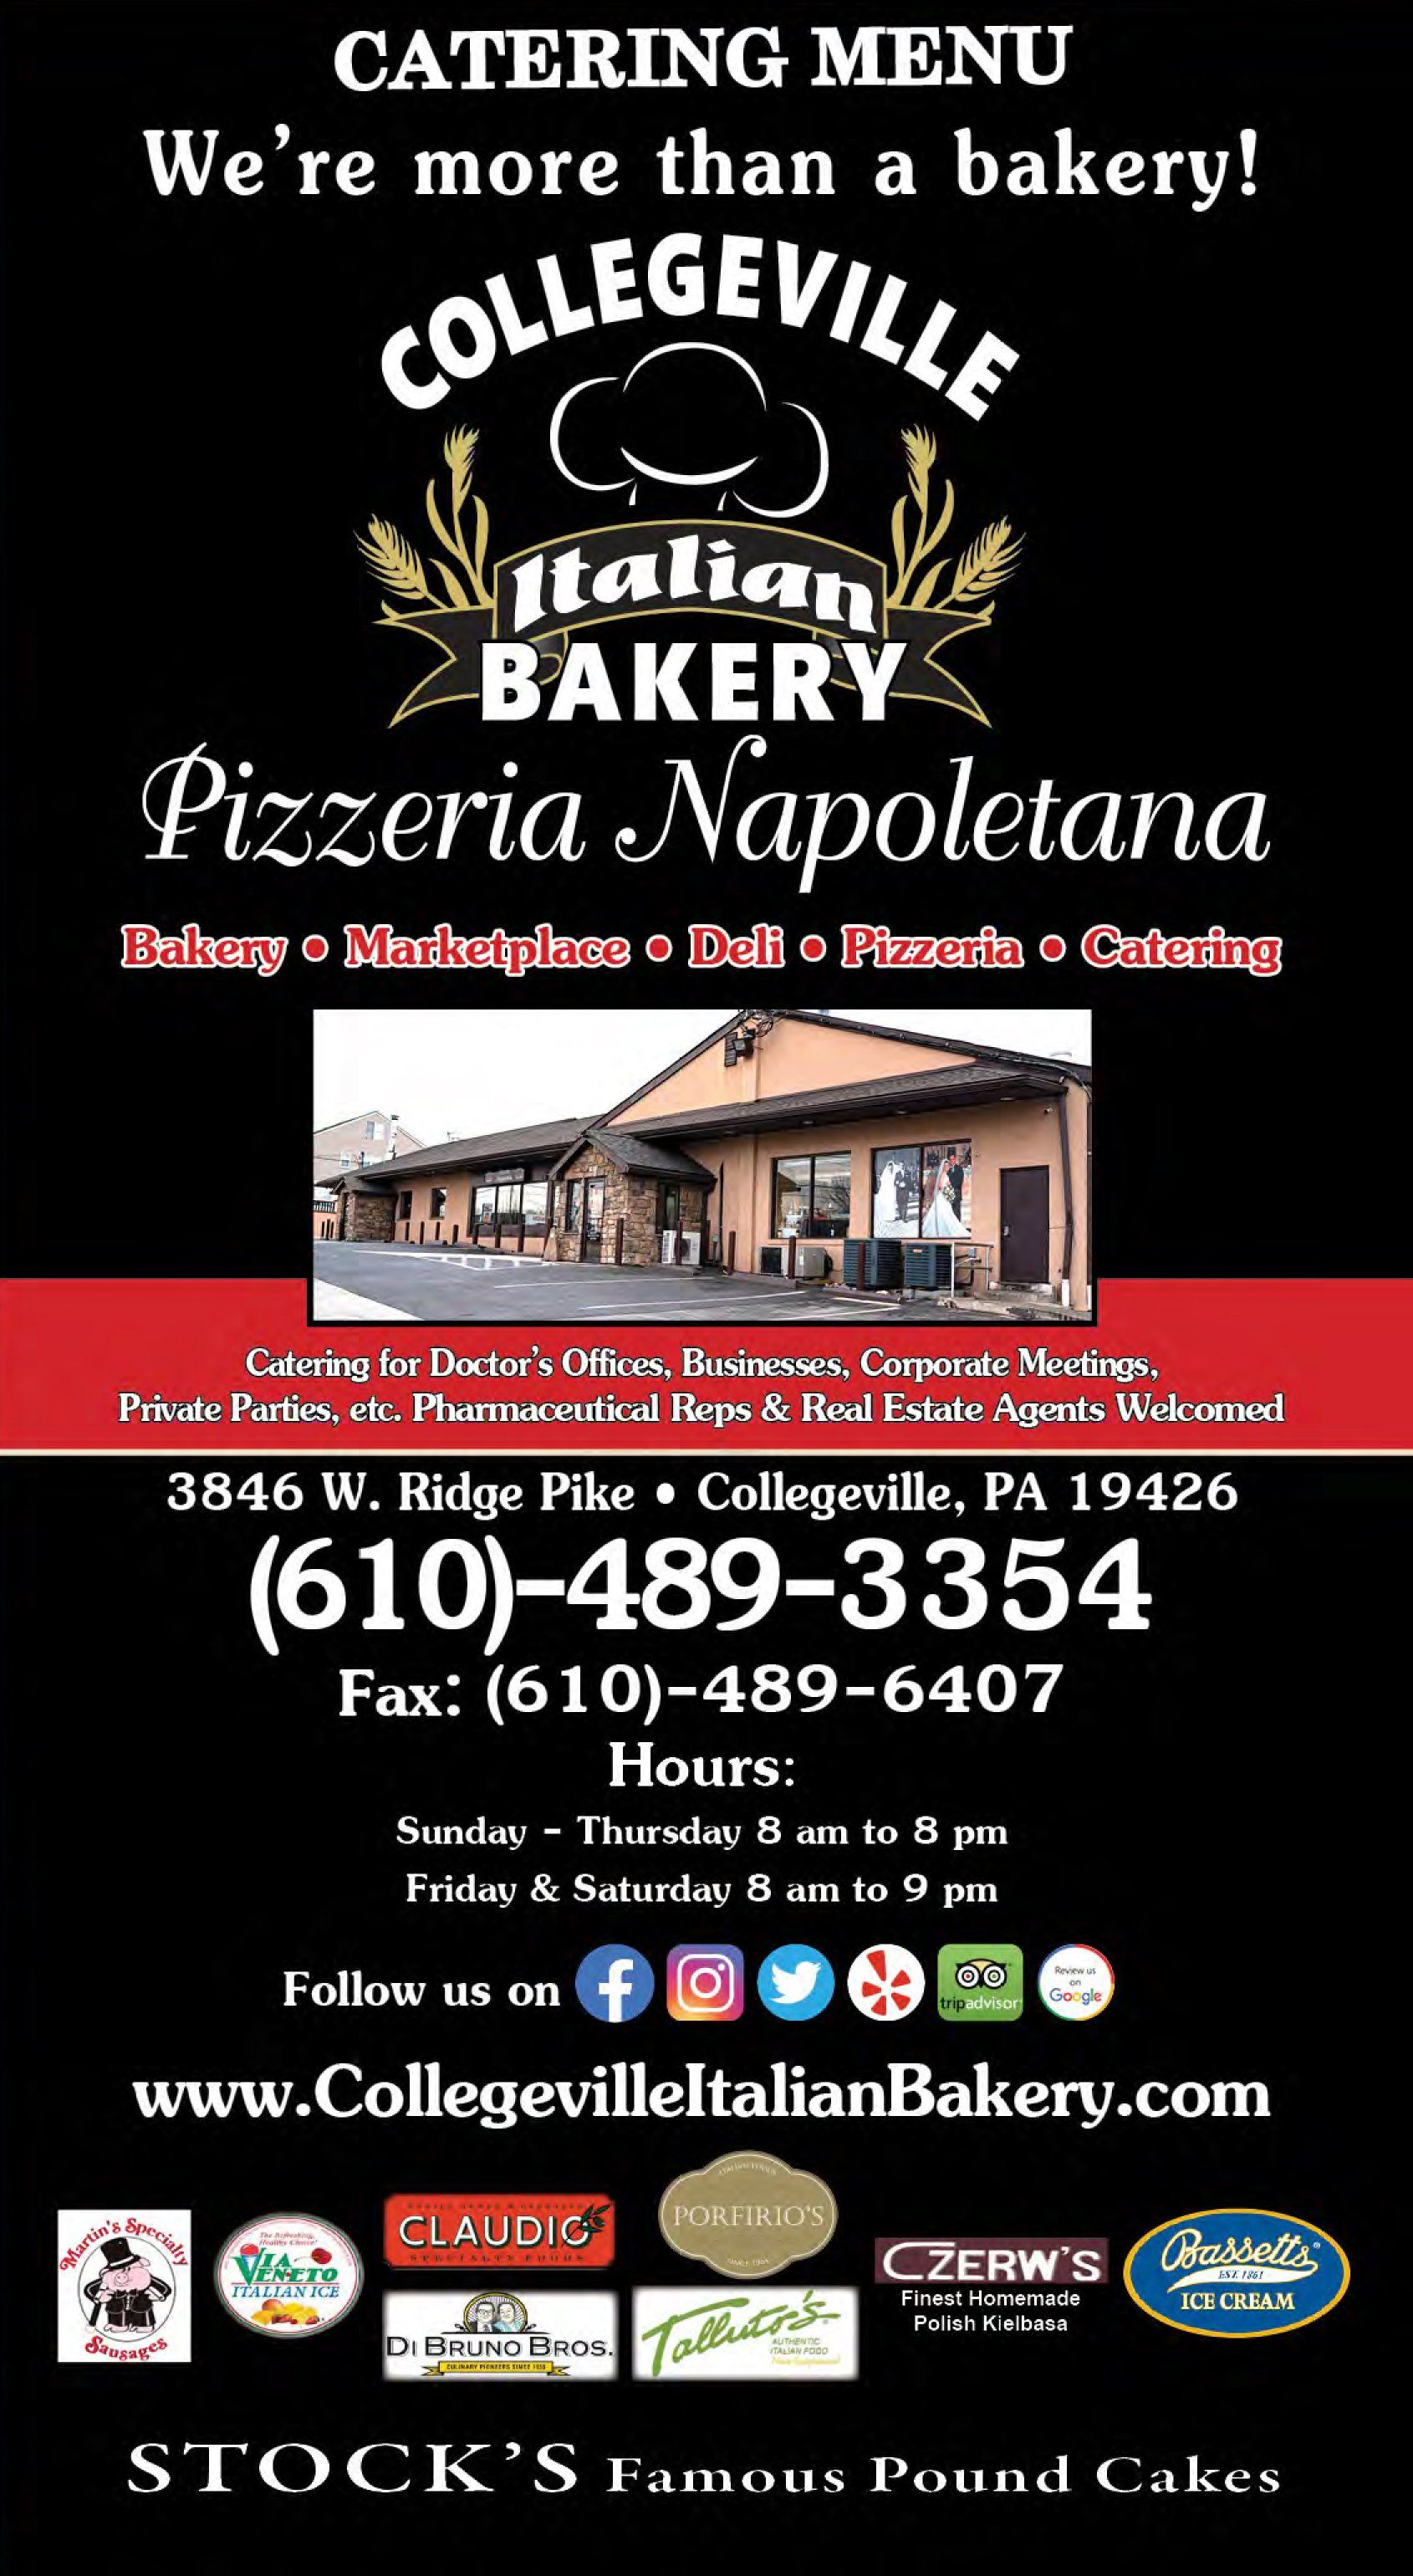 The Collegeville Italian Bakery Catering Menu Image01 1920w 